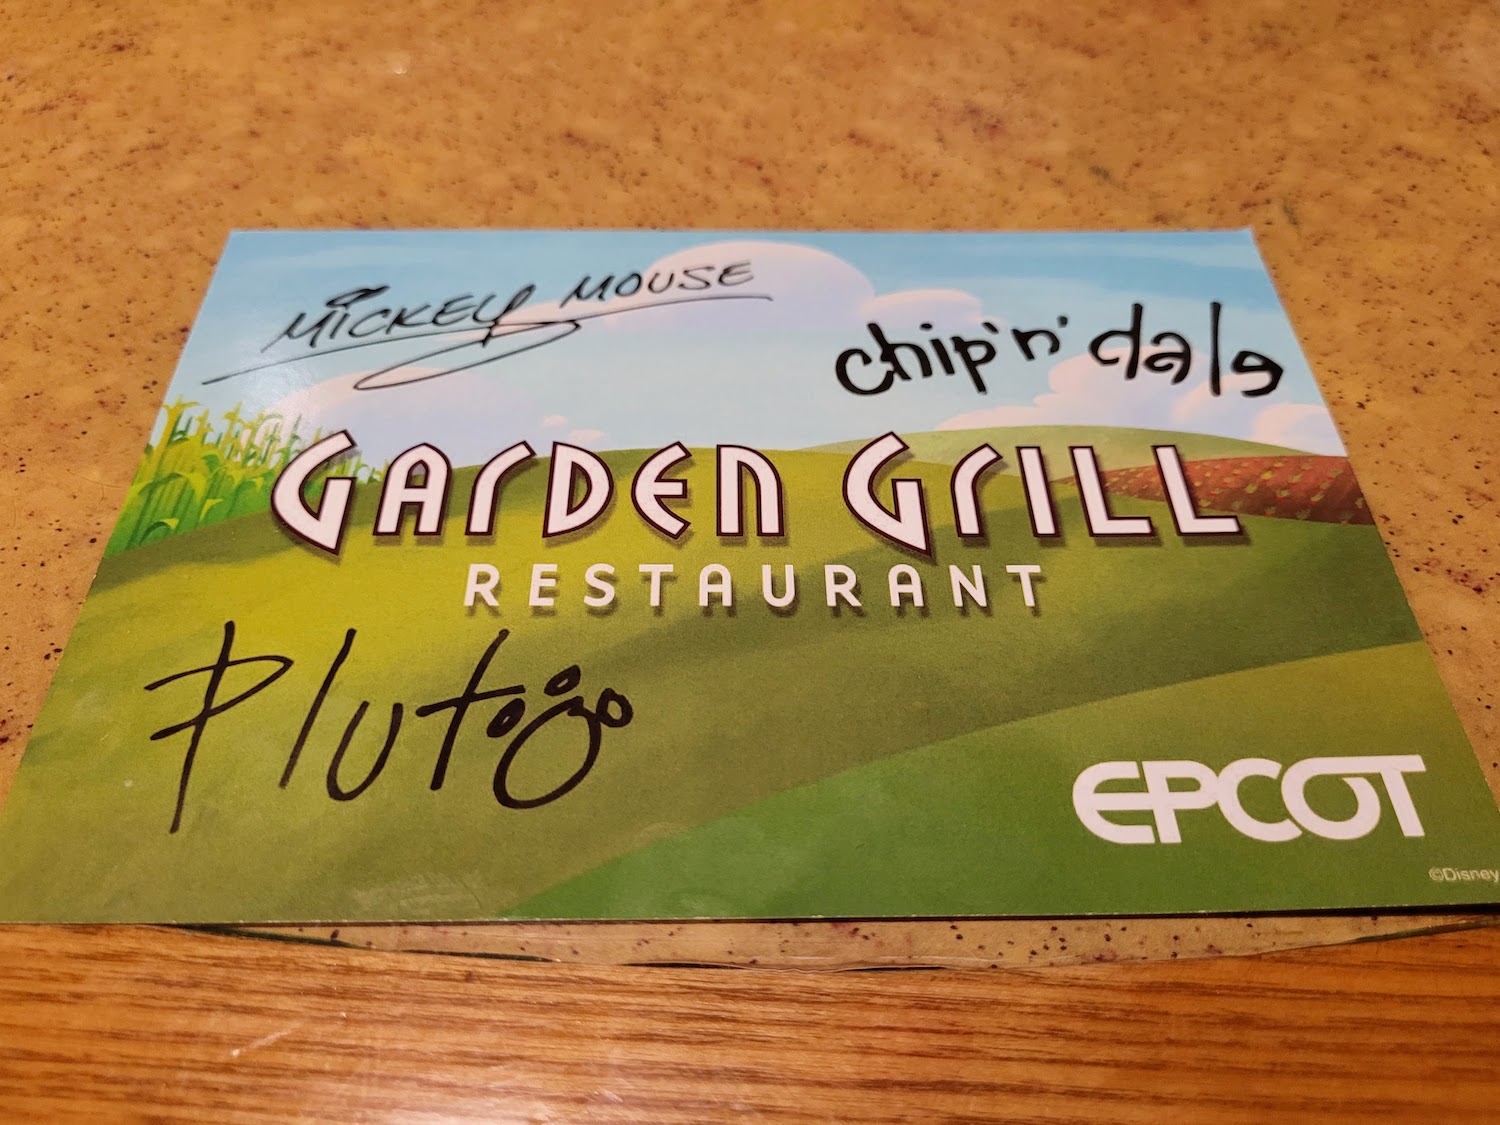 Garden Grill Card Signed by Pluto, Mickey, and Chip n Dale